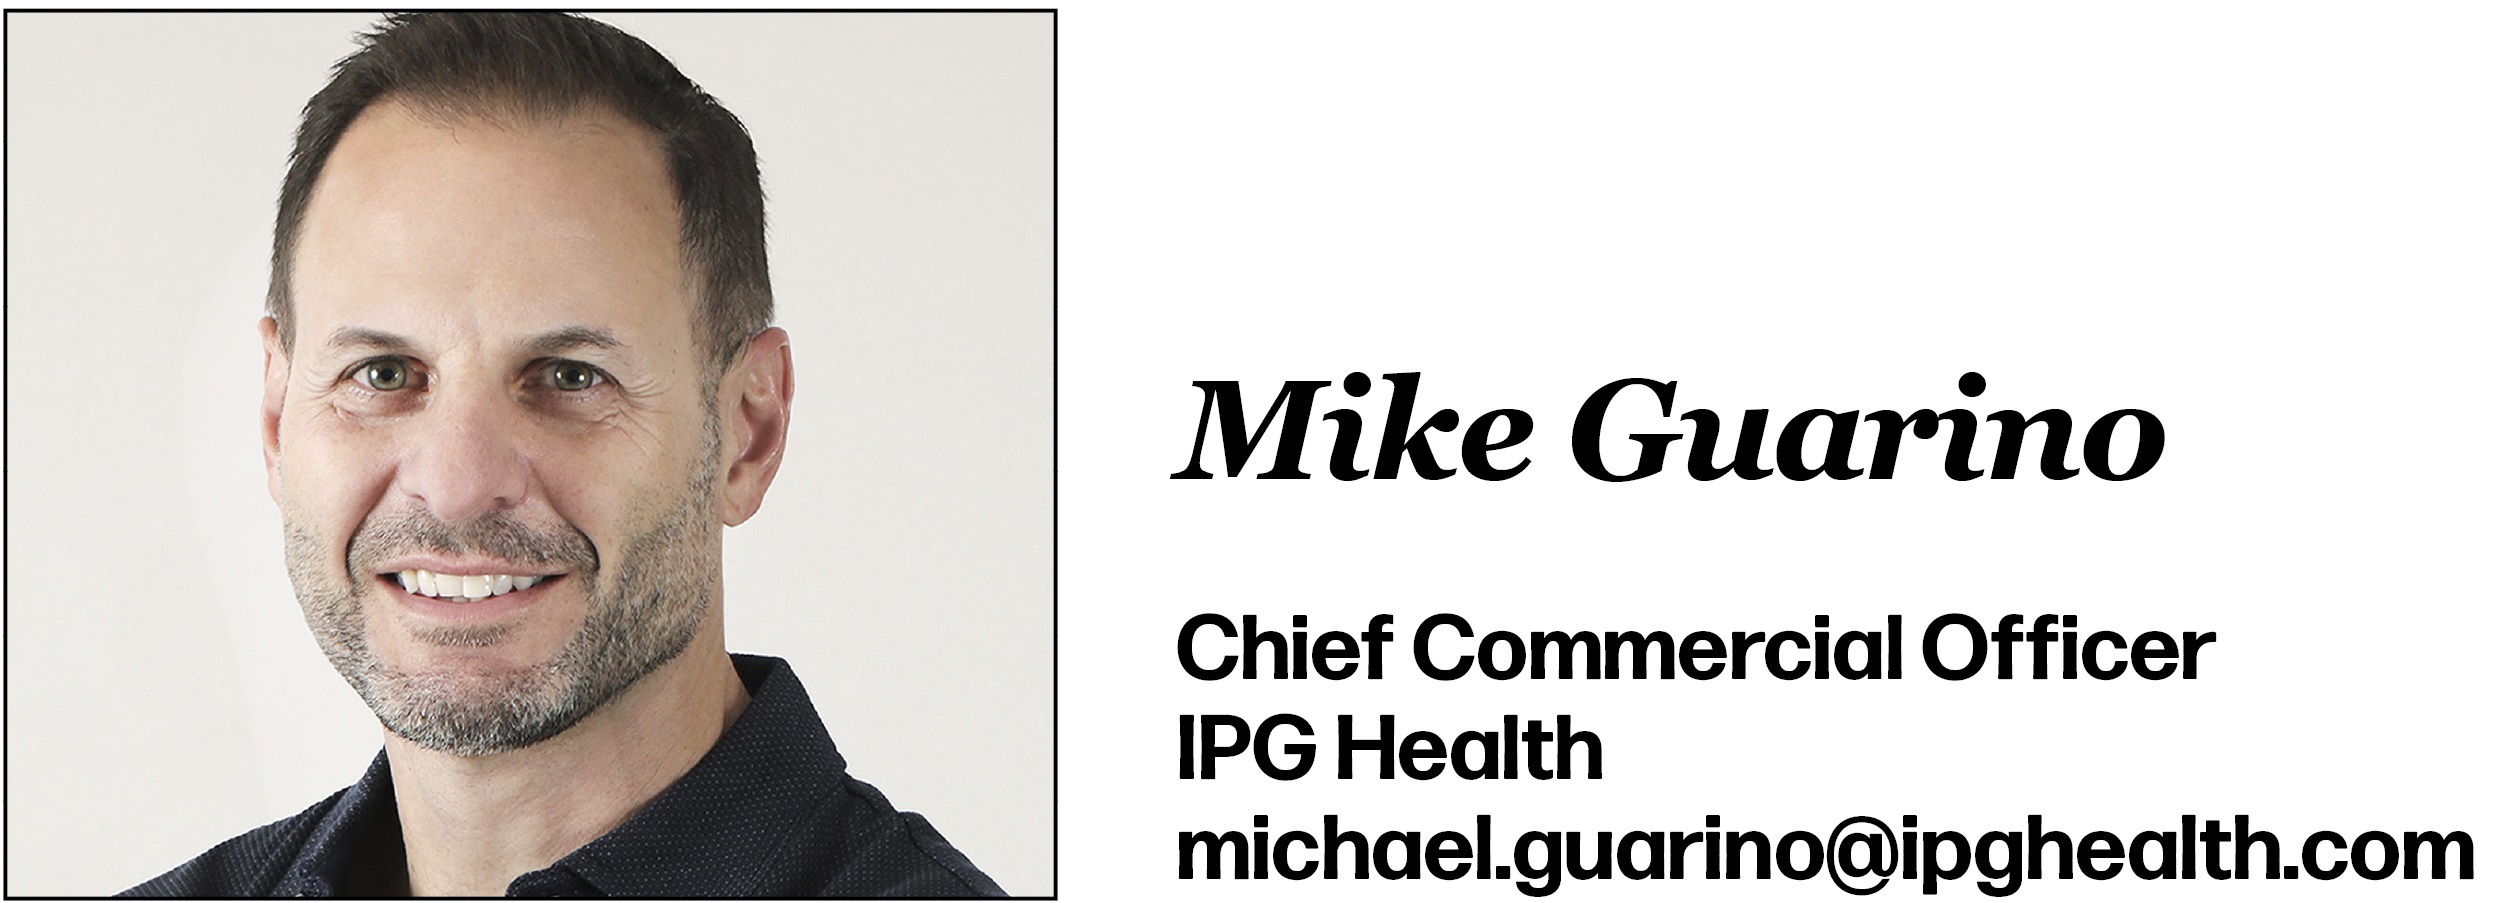 Mike Guarino Chief Commercial Officer IPG Health michael.guarino@ipghealth.com